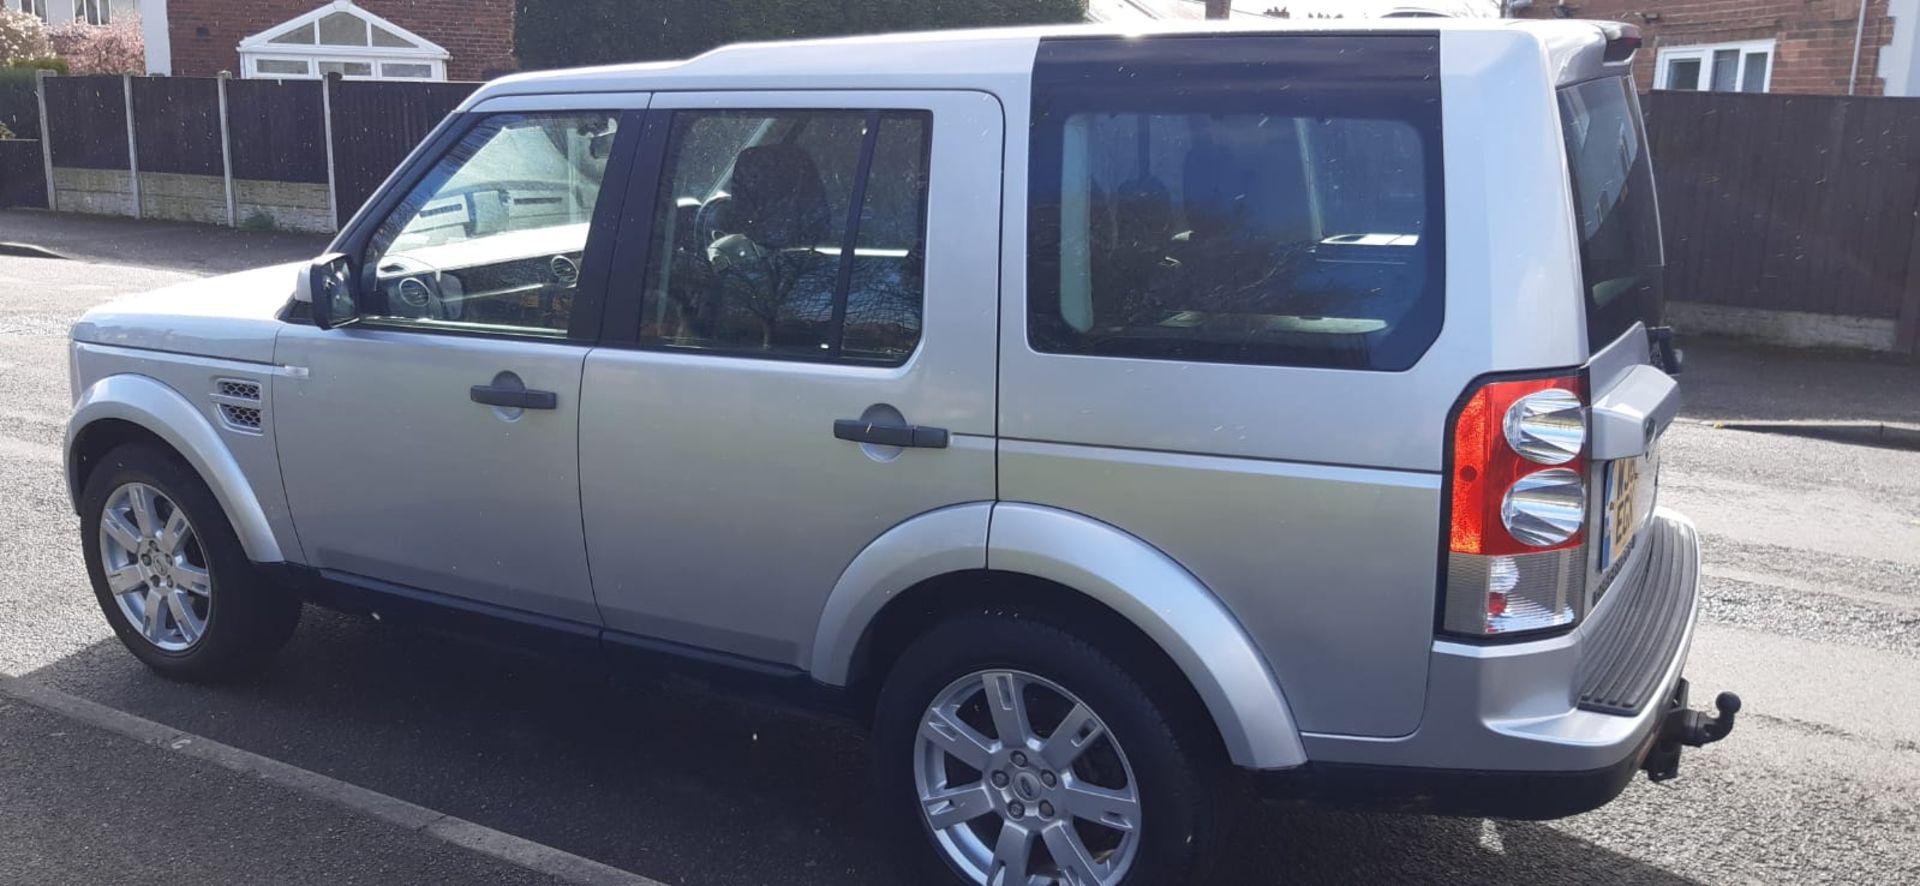 LAND ROVER DISCOVERY GS SDV6 AUTO 7 SEATER SILVER ESTATE, 127K MILES *NO VAT* - Image 6 of 16